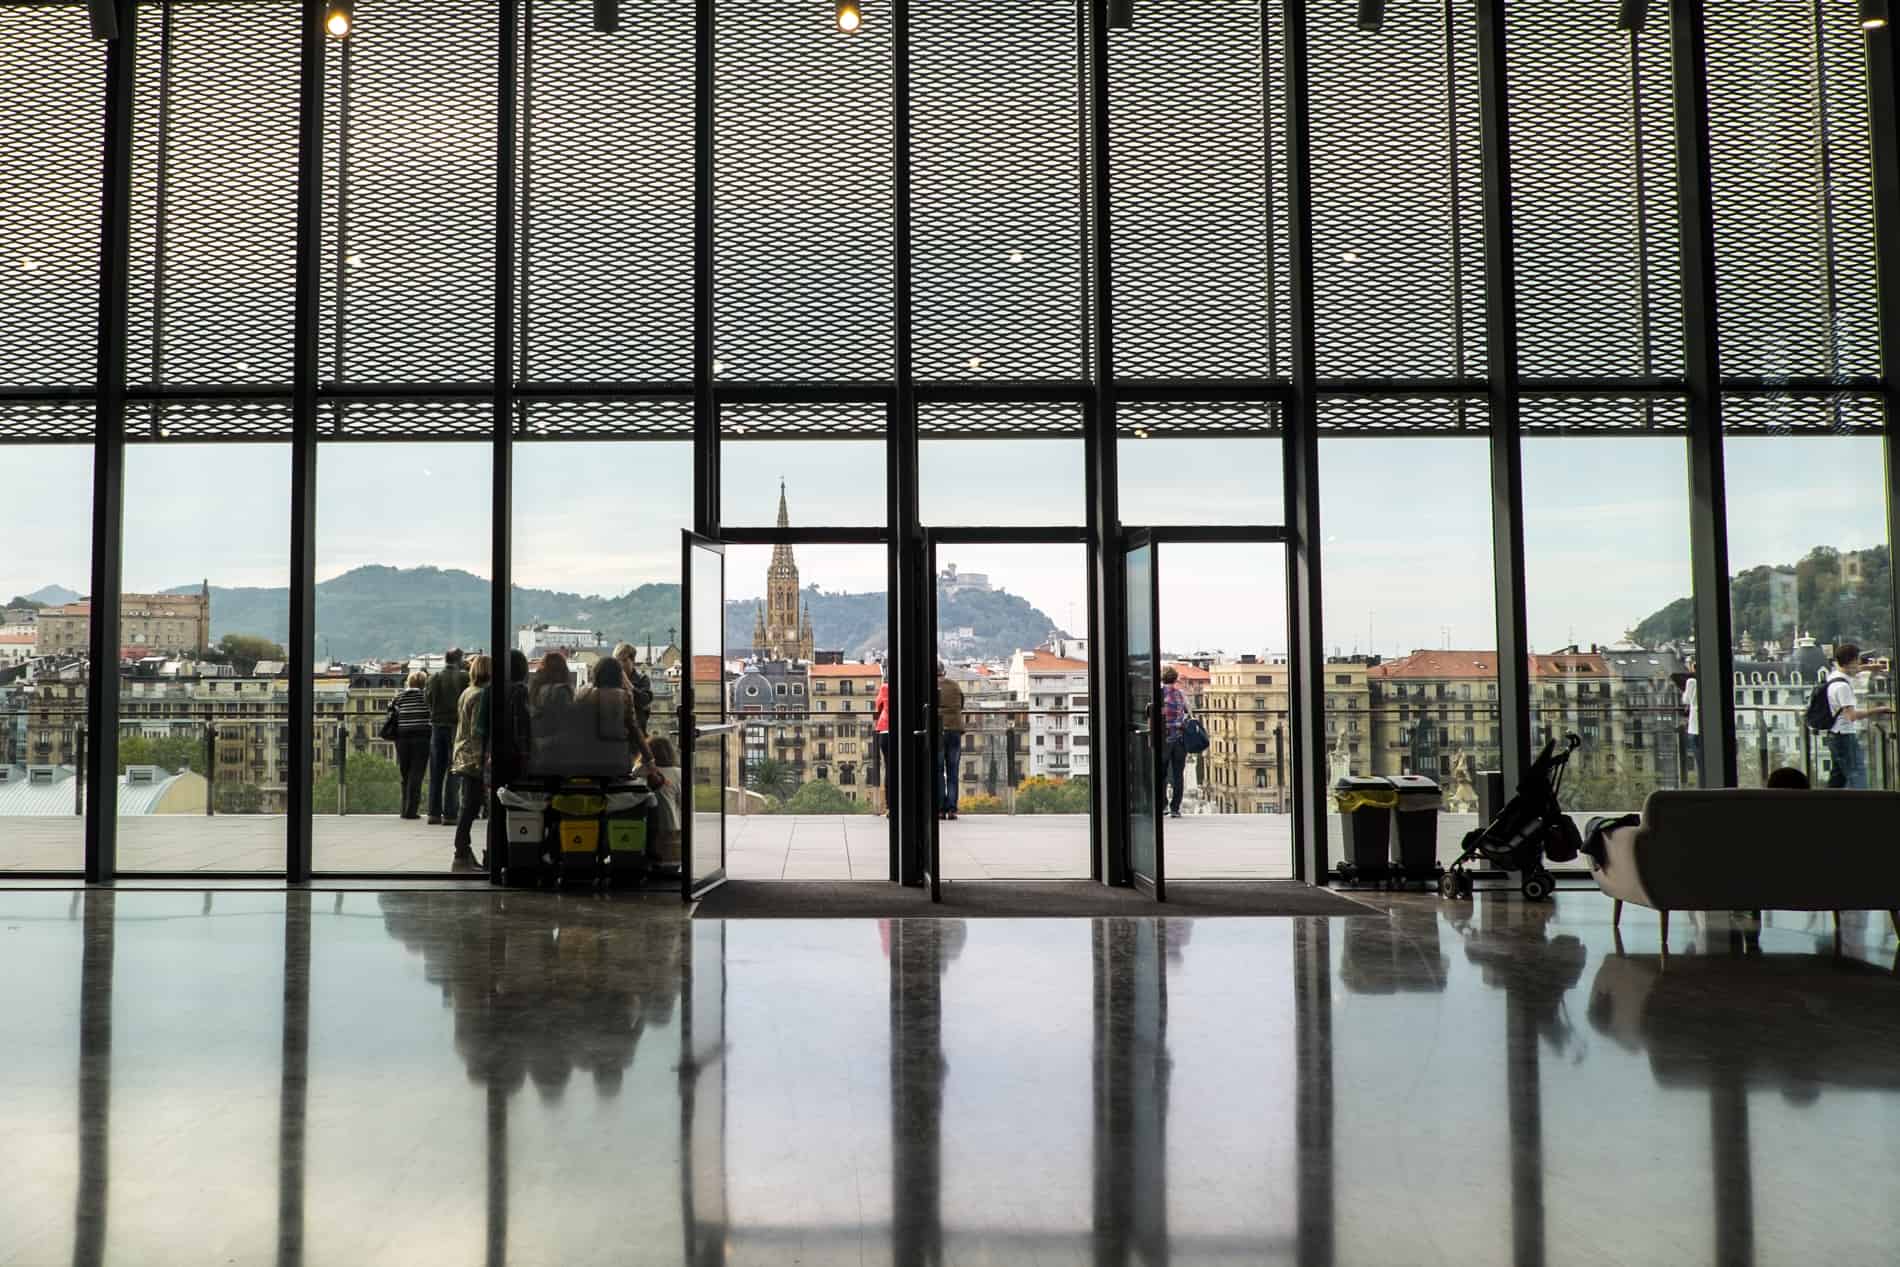 People stand at a platform outside a cultural centre looking out to a view of san Sebastian city.